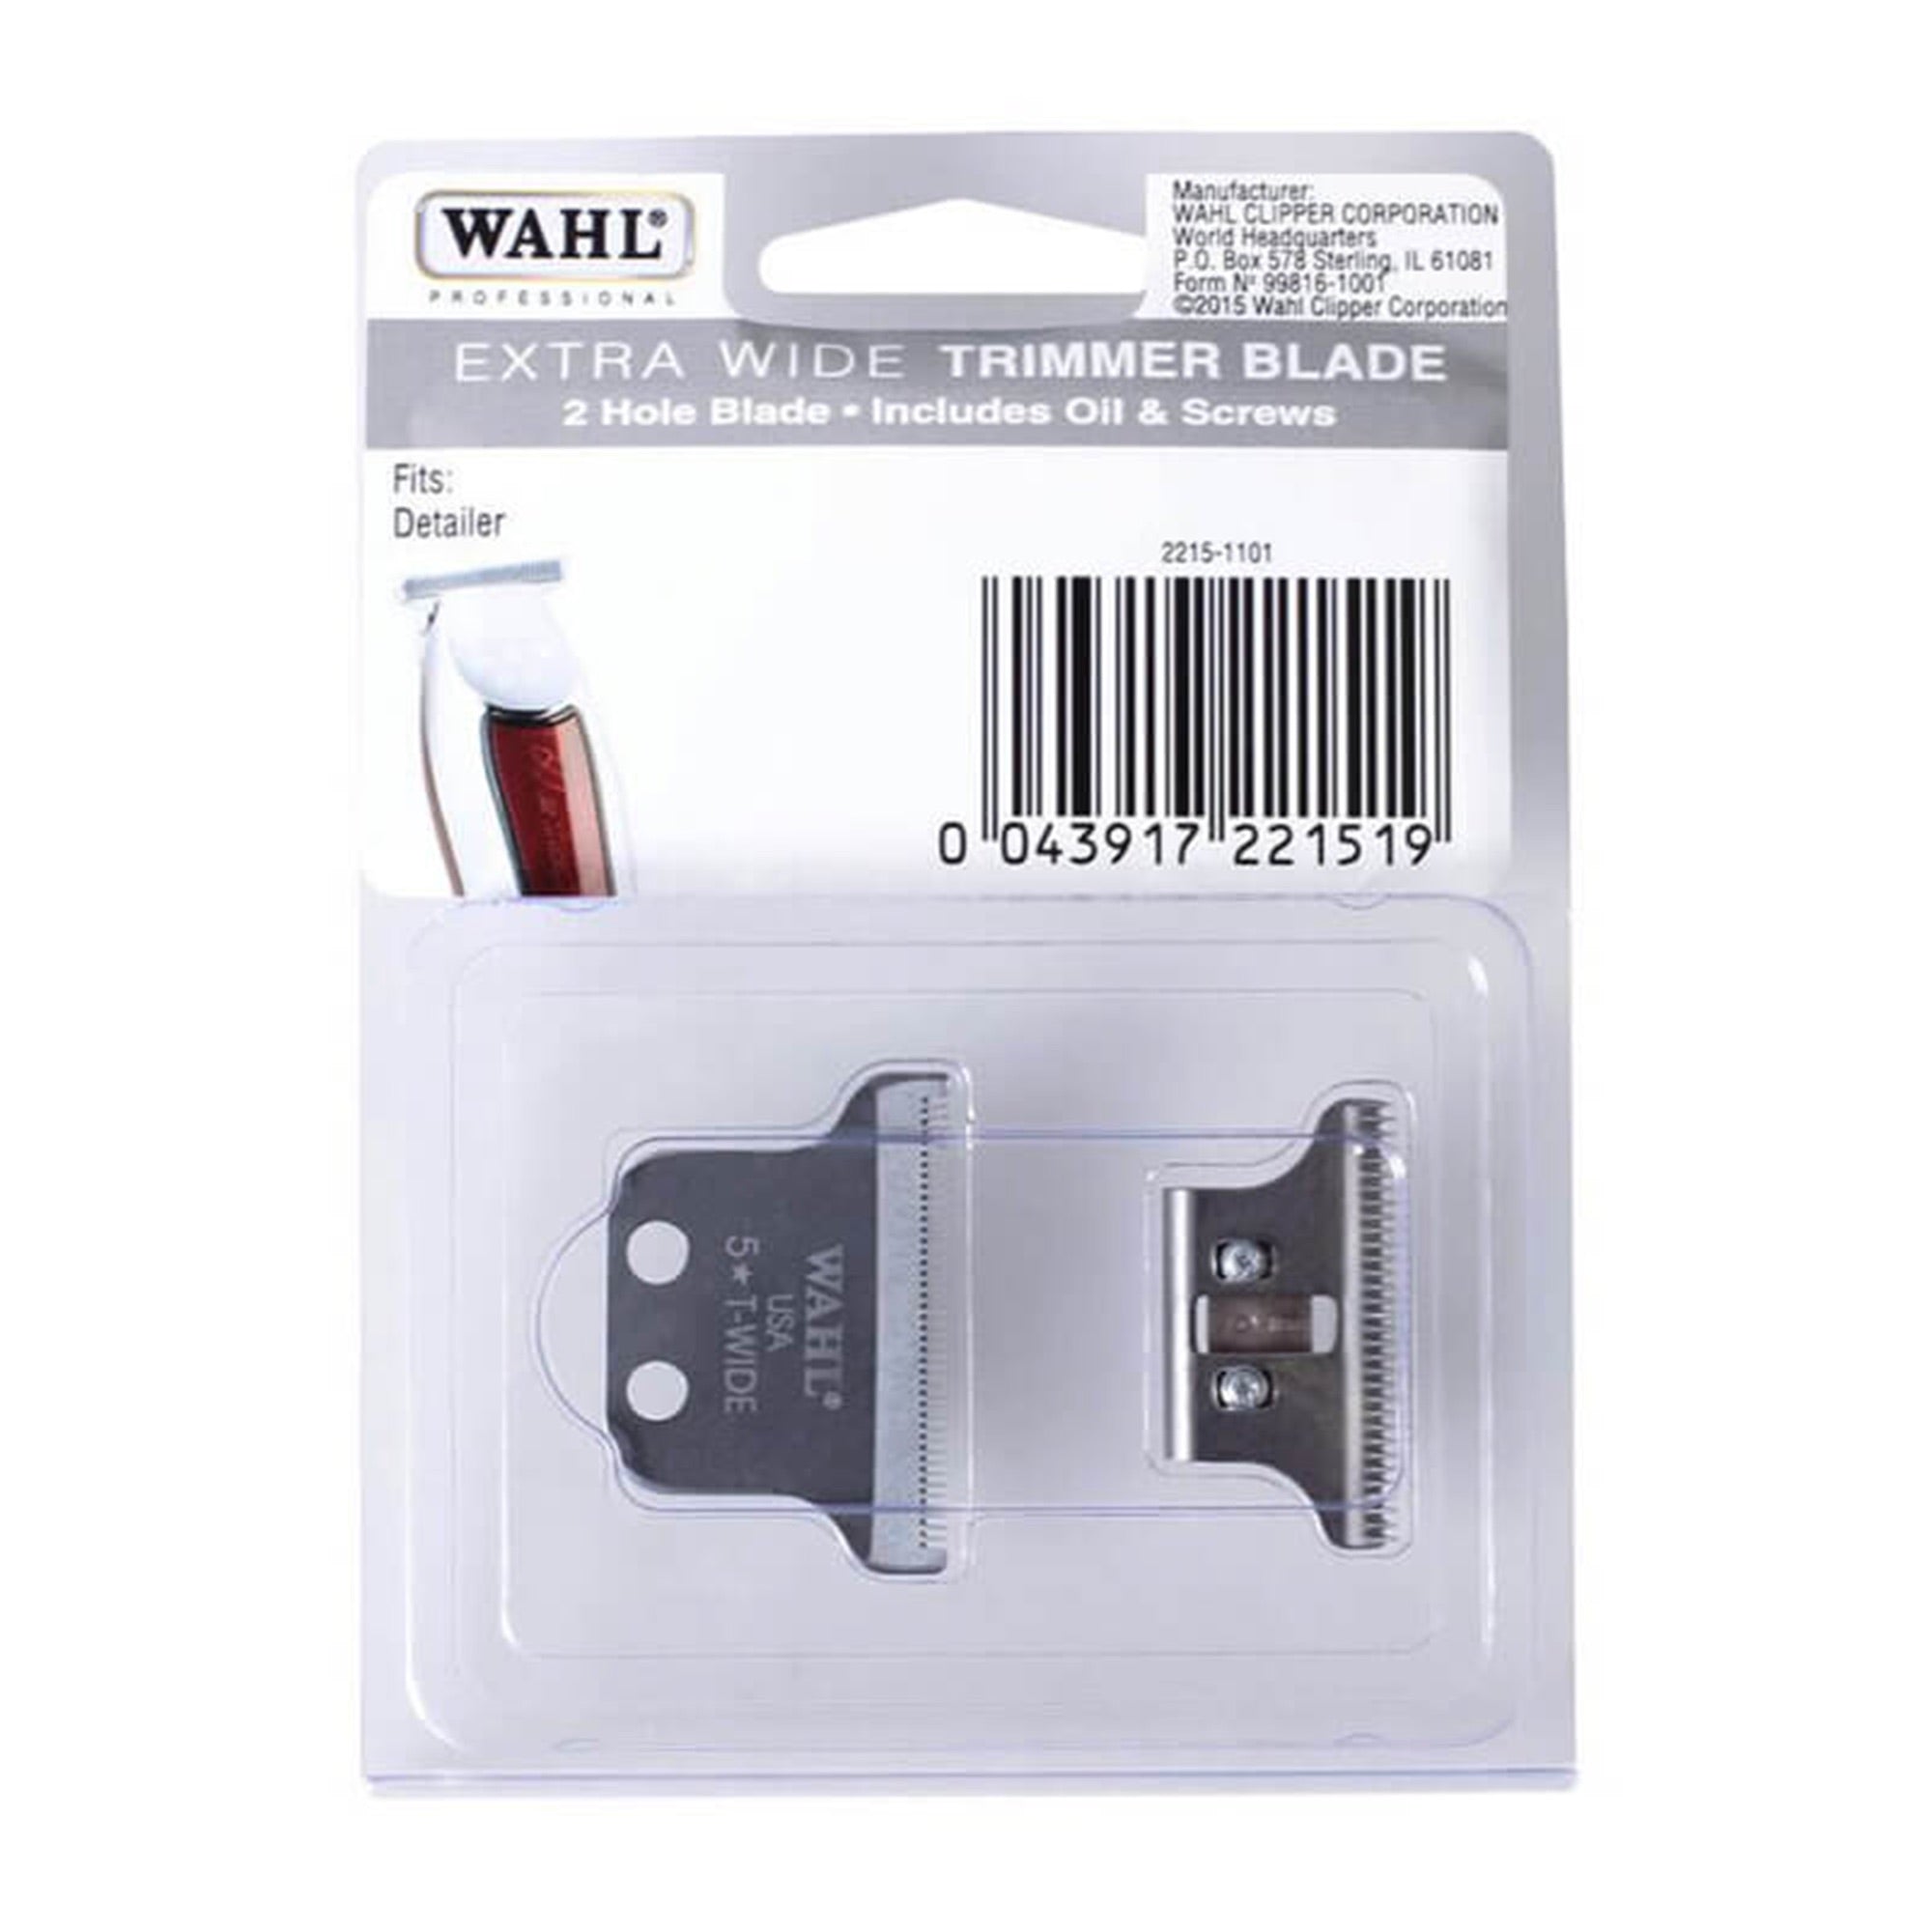 Wahl - 2215-1101 2 Hole Extra Wide Trimmer Blade